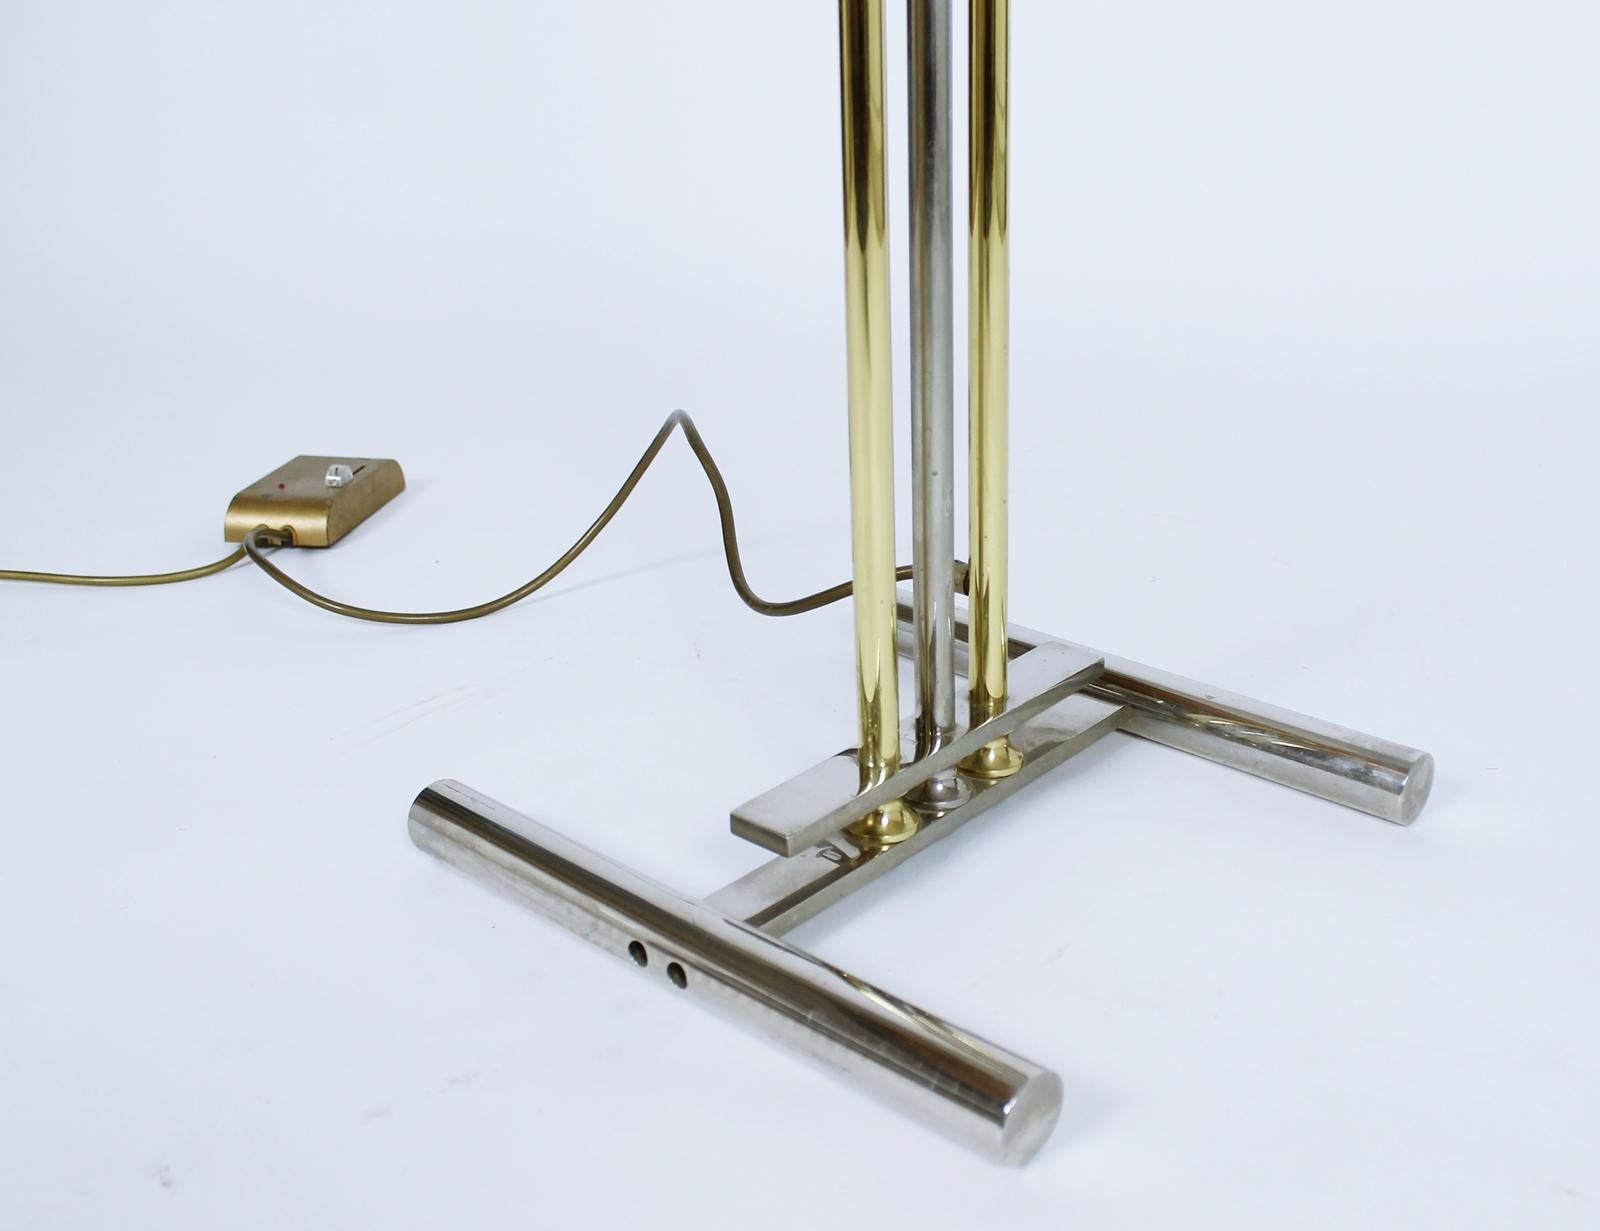 Goetz Chrome and Brass Adjustable Halogen Floor Lamp with Dimmer, Germany, 1970 For Sale 2